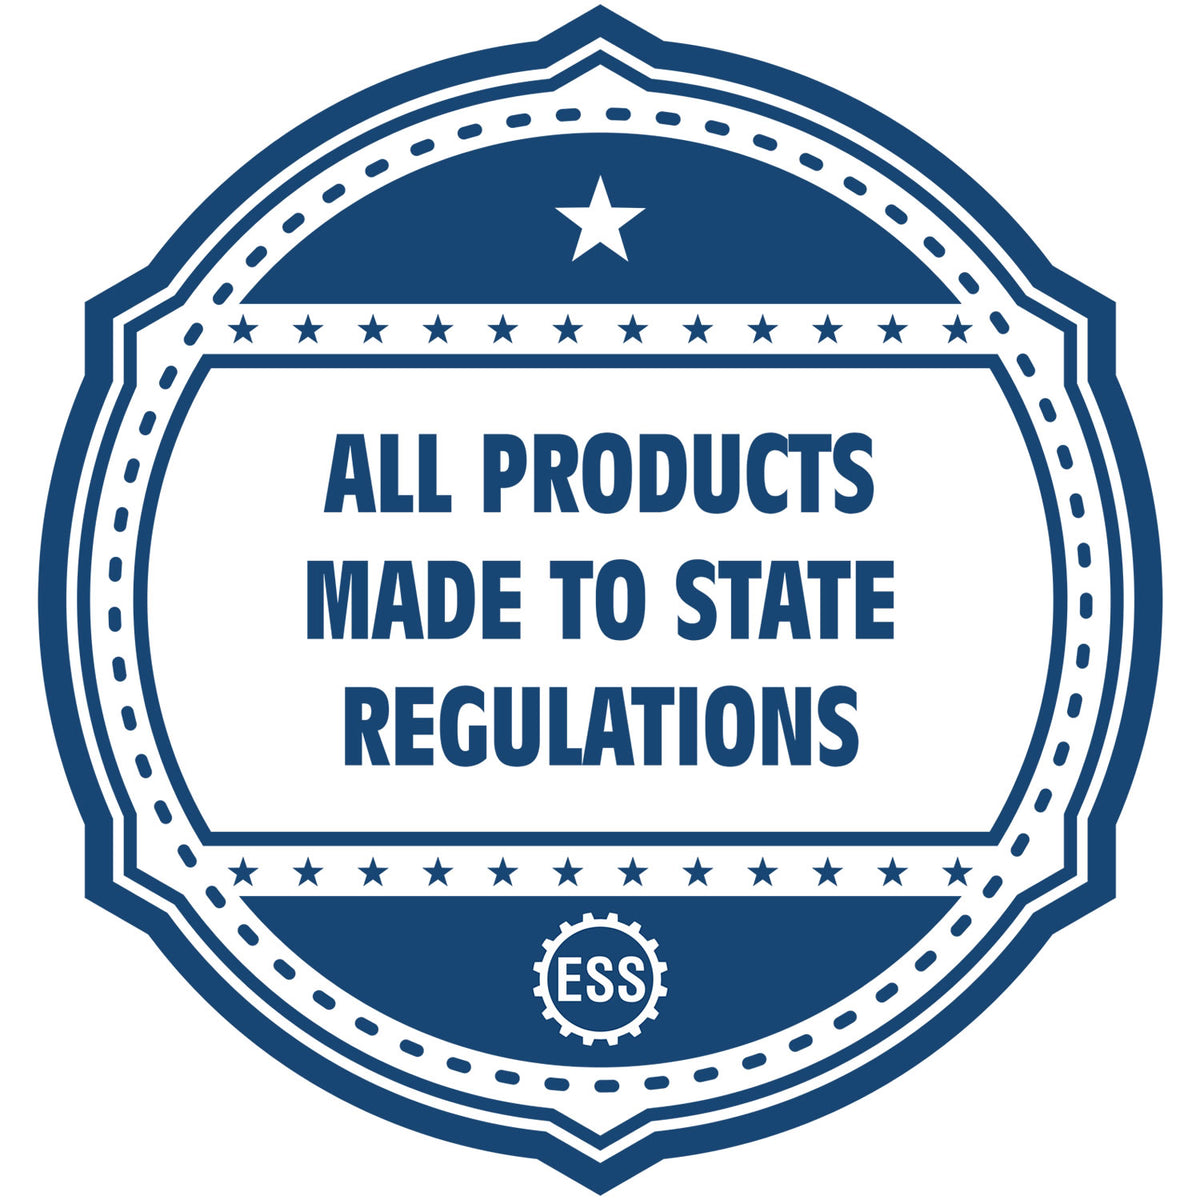 An icon or badge element for the Handheld District of Columbia Architect Seal Embosser showing that this product is made in compliance with state regulations.